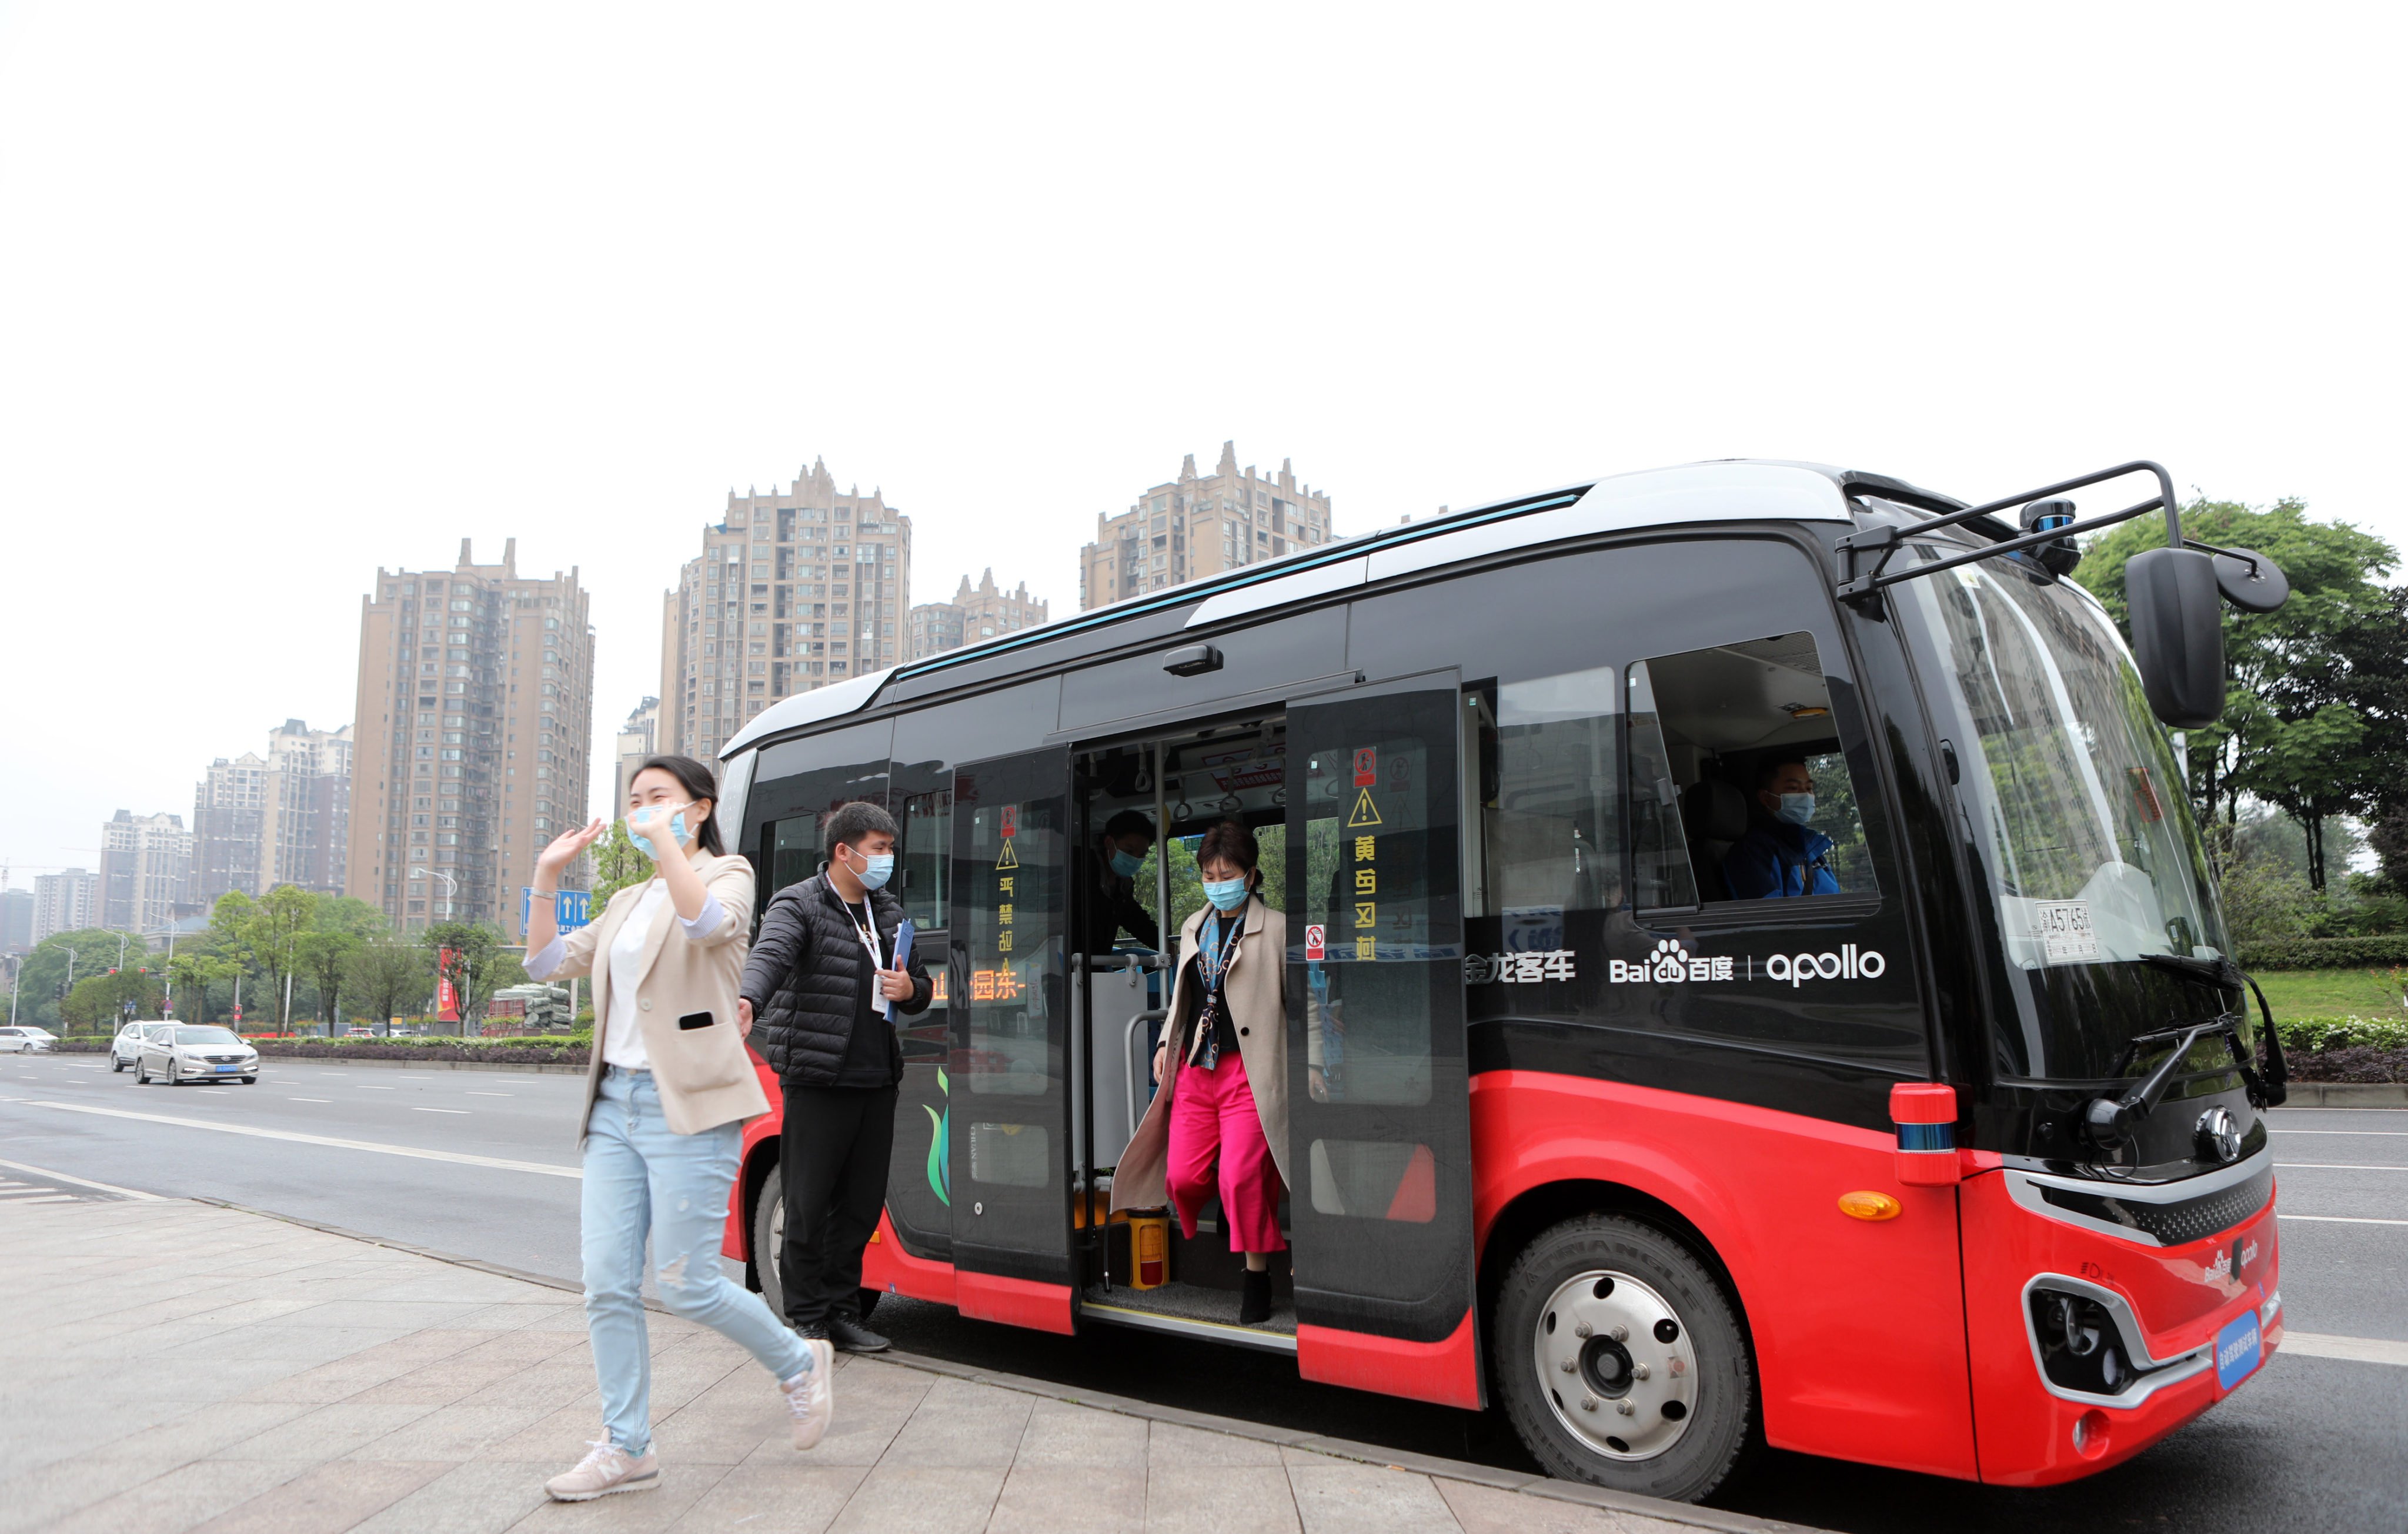 Passengers get off a Level 4 autonomous driving bus developed by Baidu on April 16, 2021 in Chongqing, southwest China. Photo: VCG via Getty Images